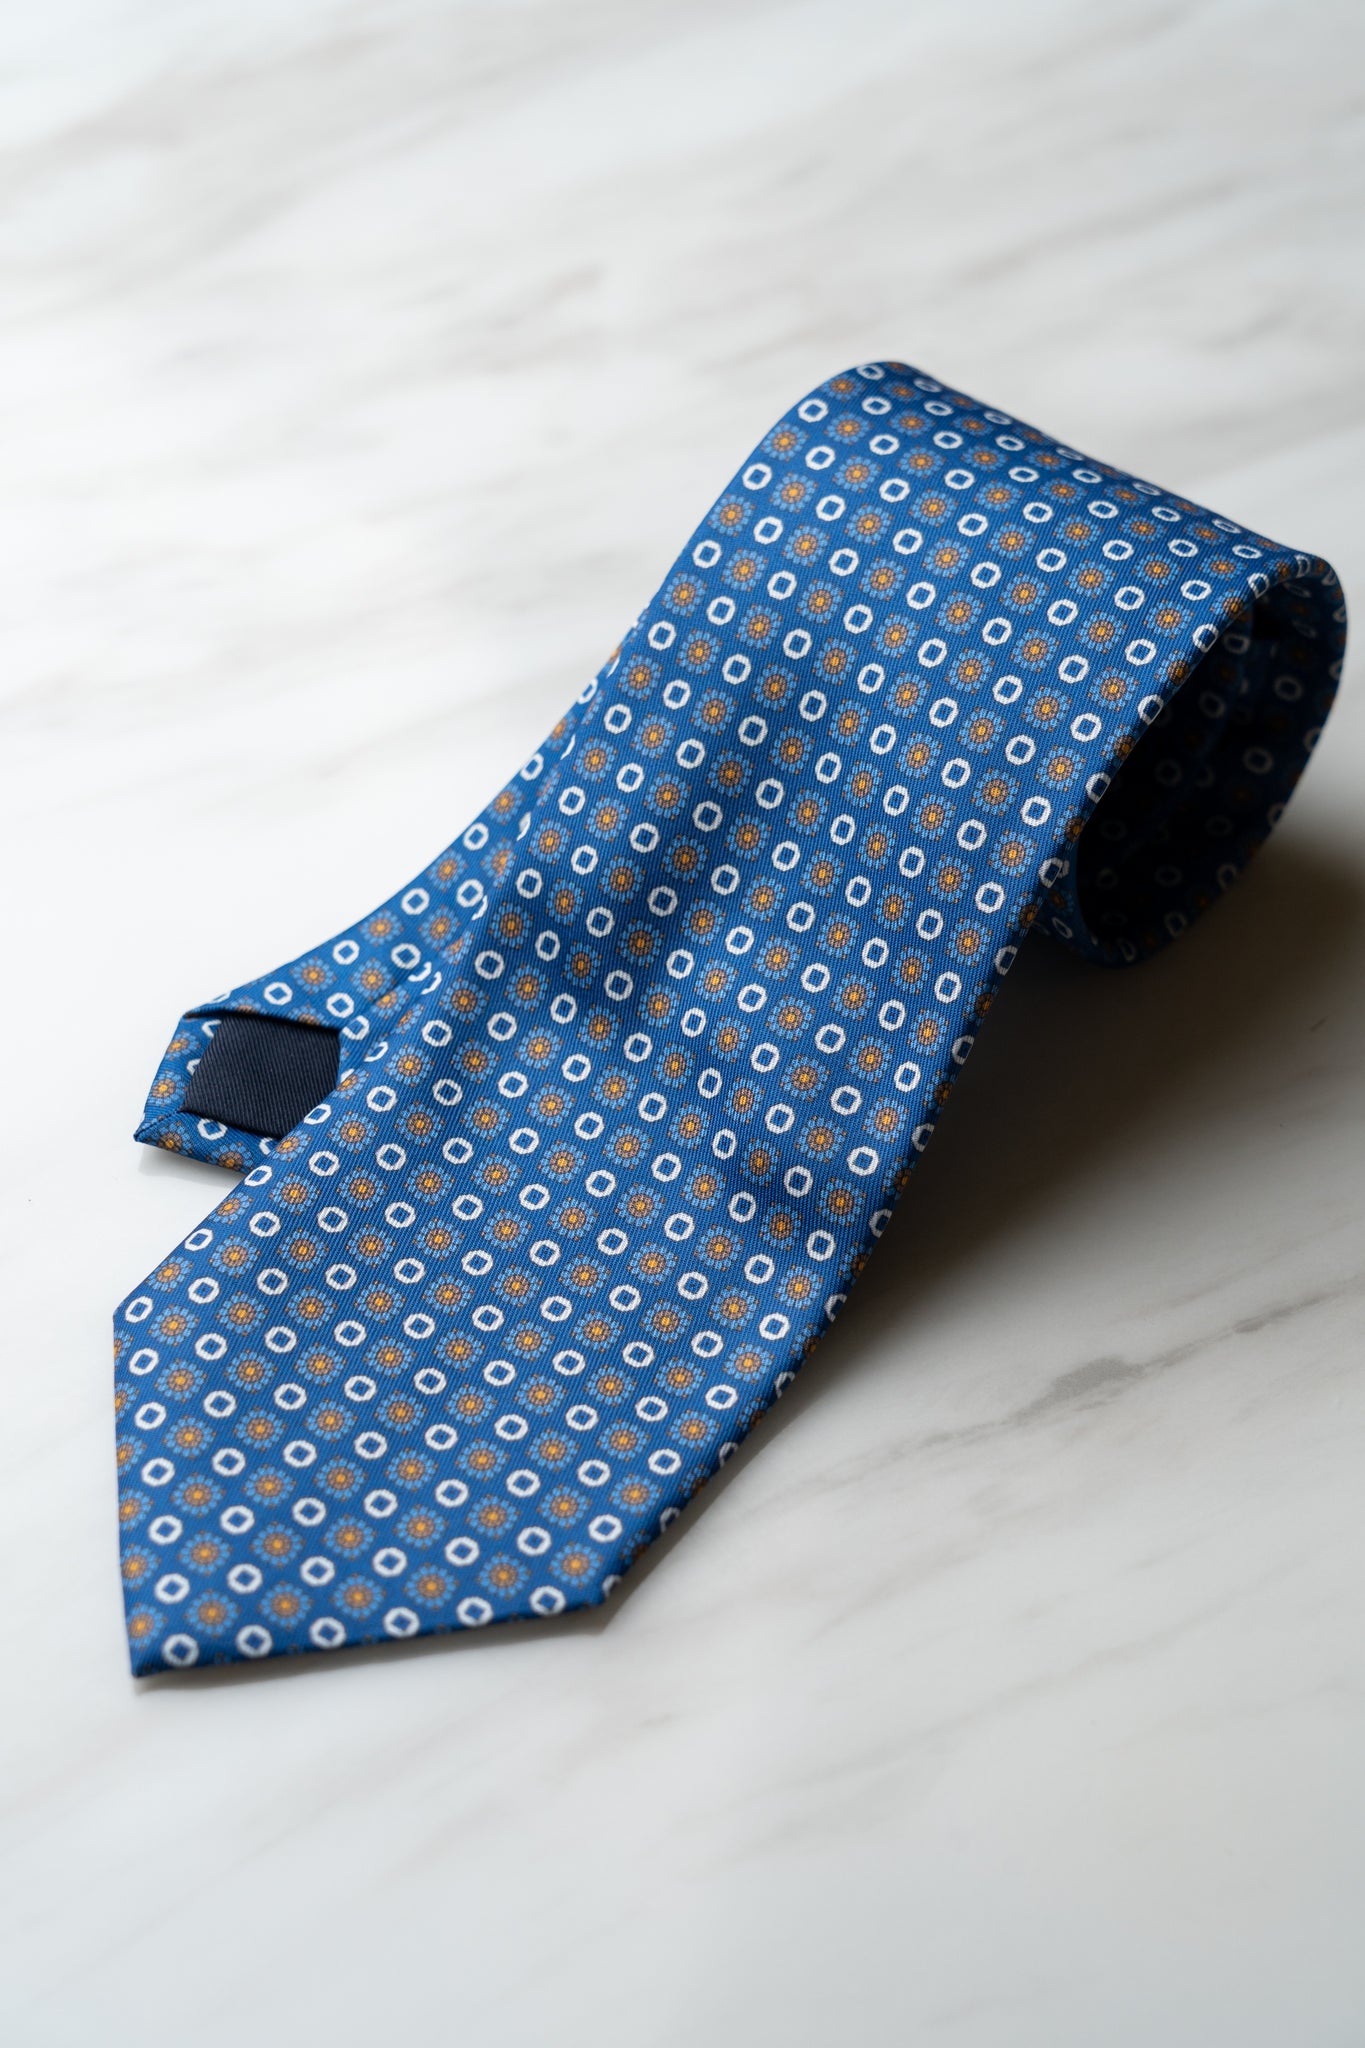 AT164BU Bright Blue Dots Tie With Orange Floral